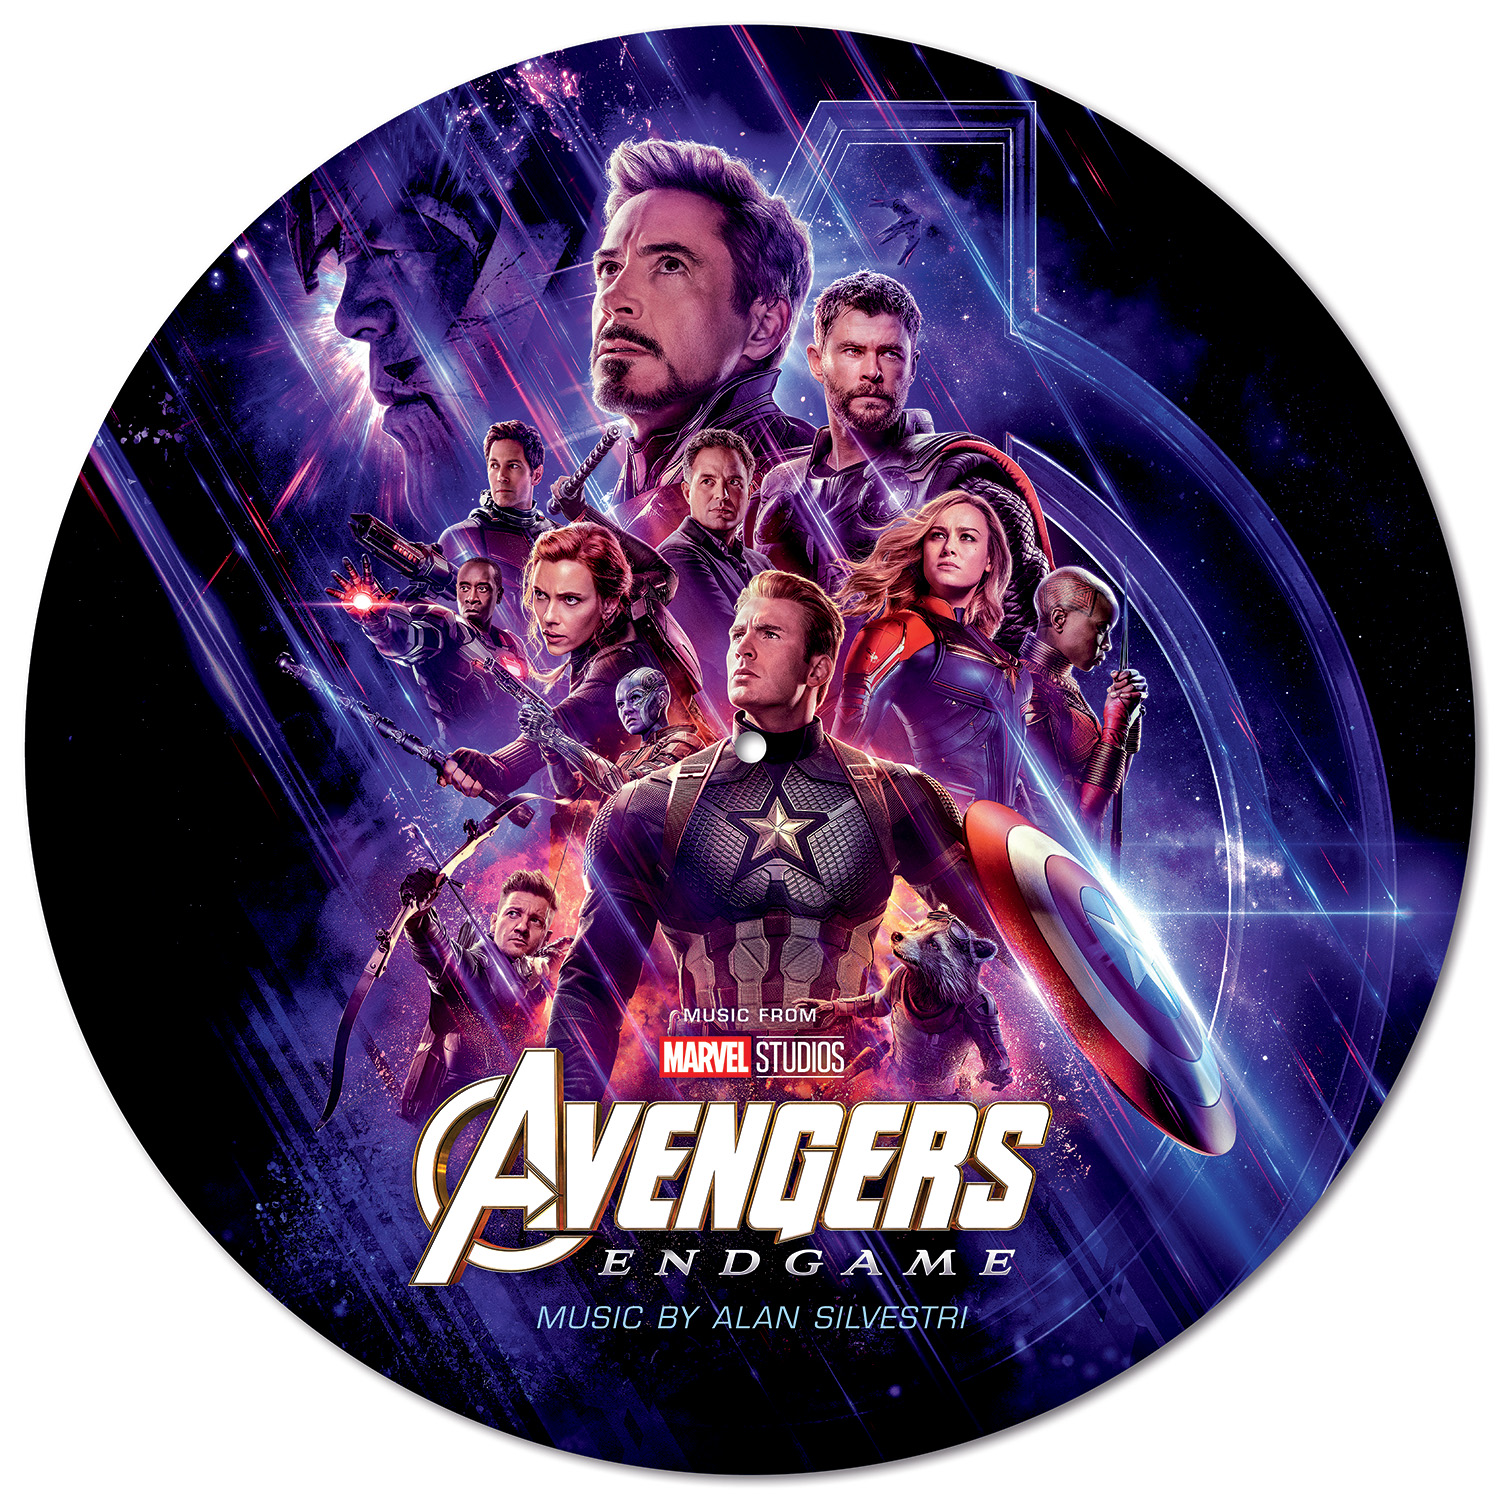 D23 Expo will introduce the first copies of Avengers: Endgame on picture disc vinyl.